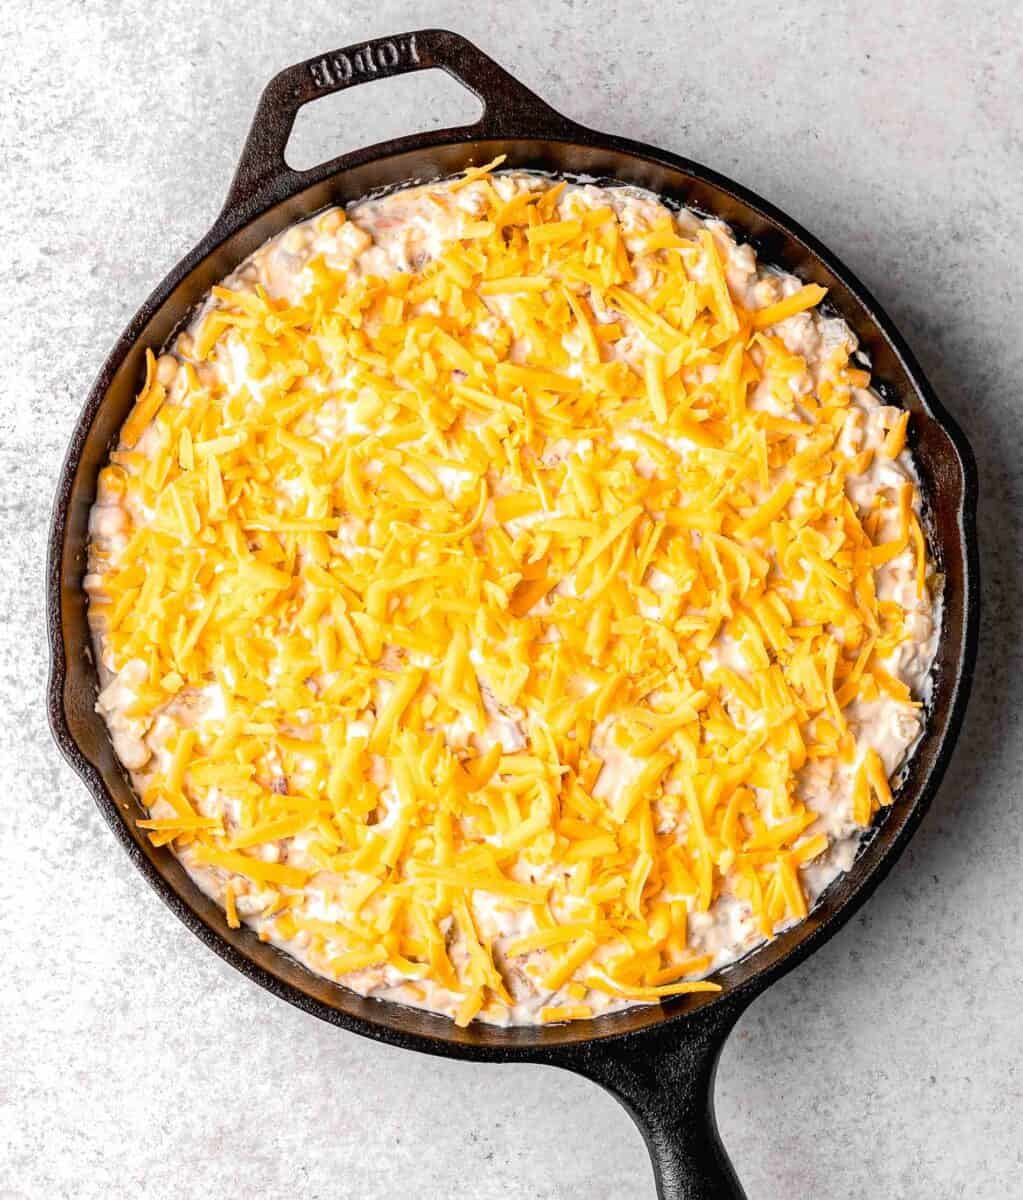 extra shredded cheddar cheese sprinkled on top of the corn dip mixture in the cast iron skillet